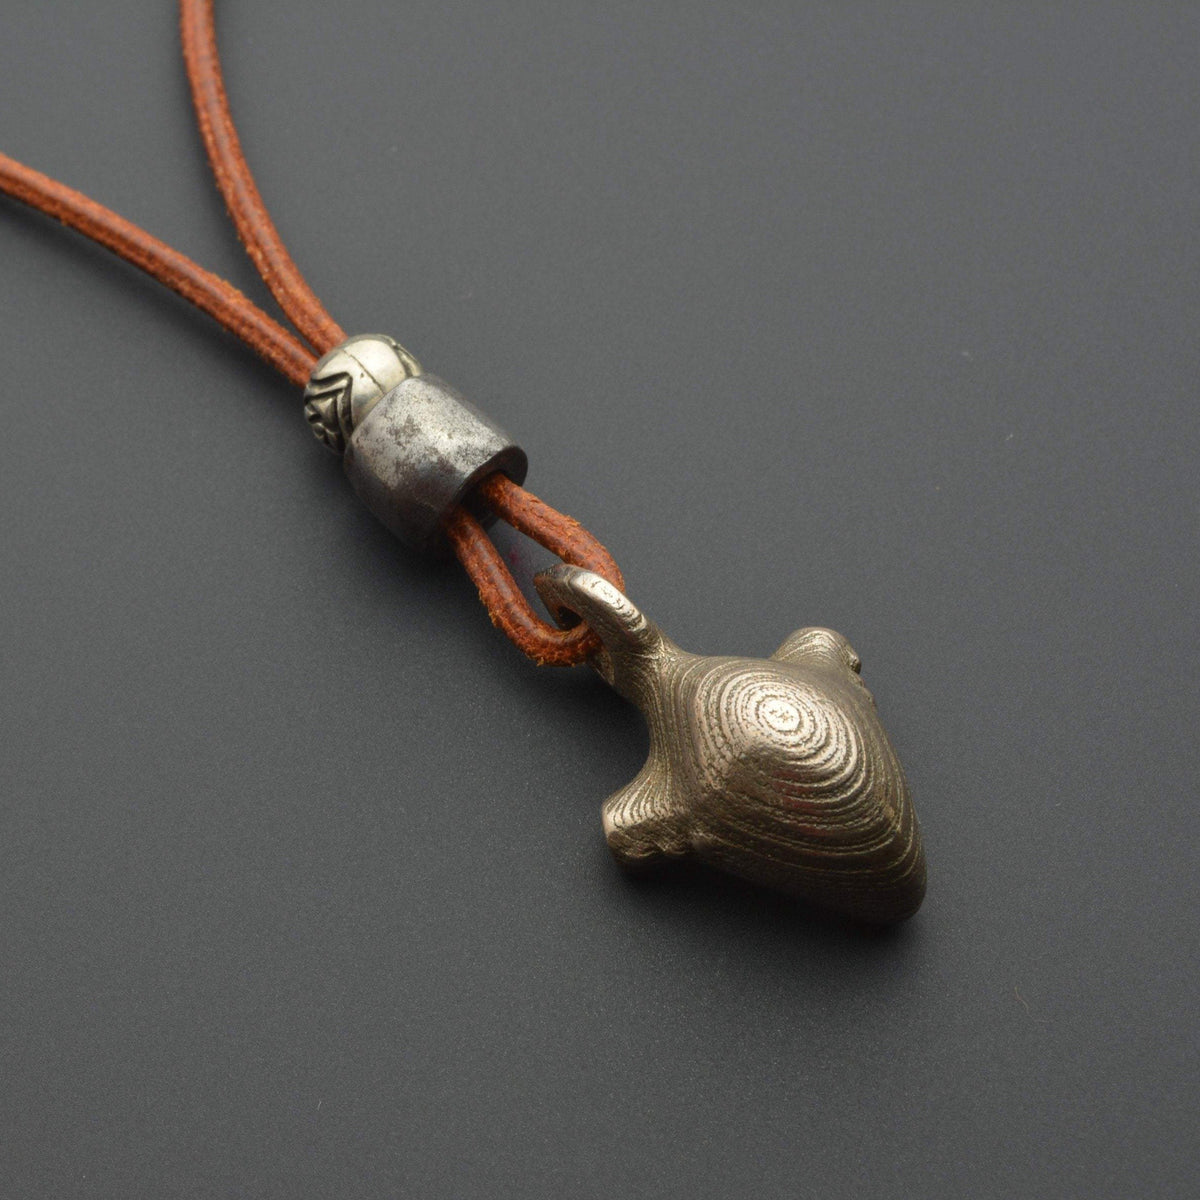 Iron pendant with leather cord